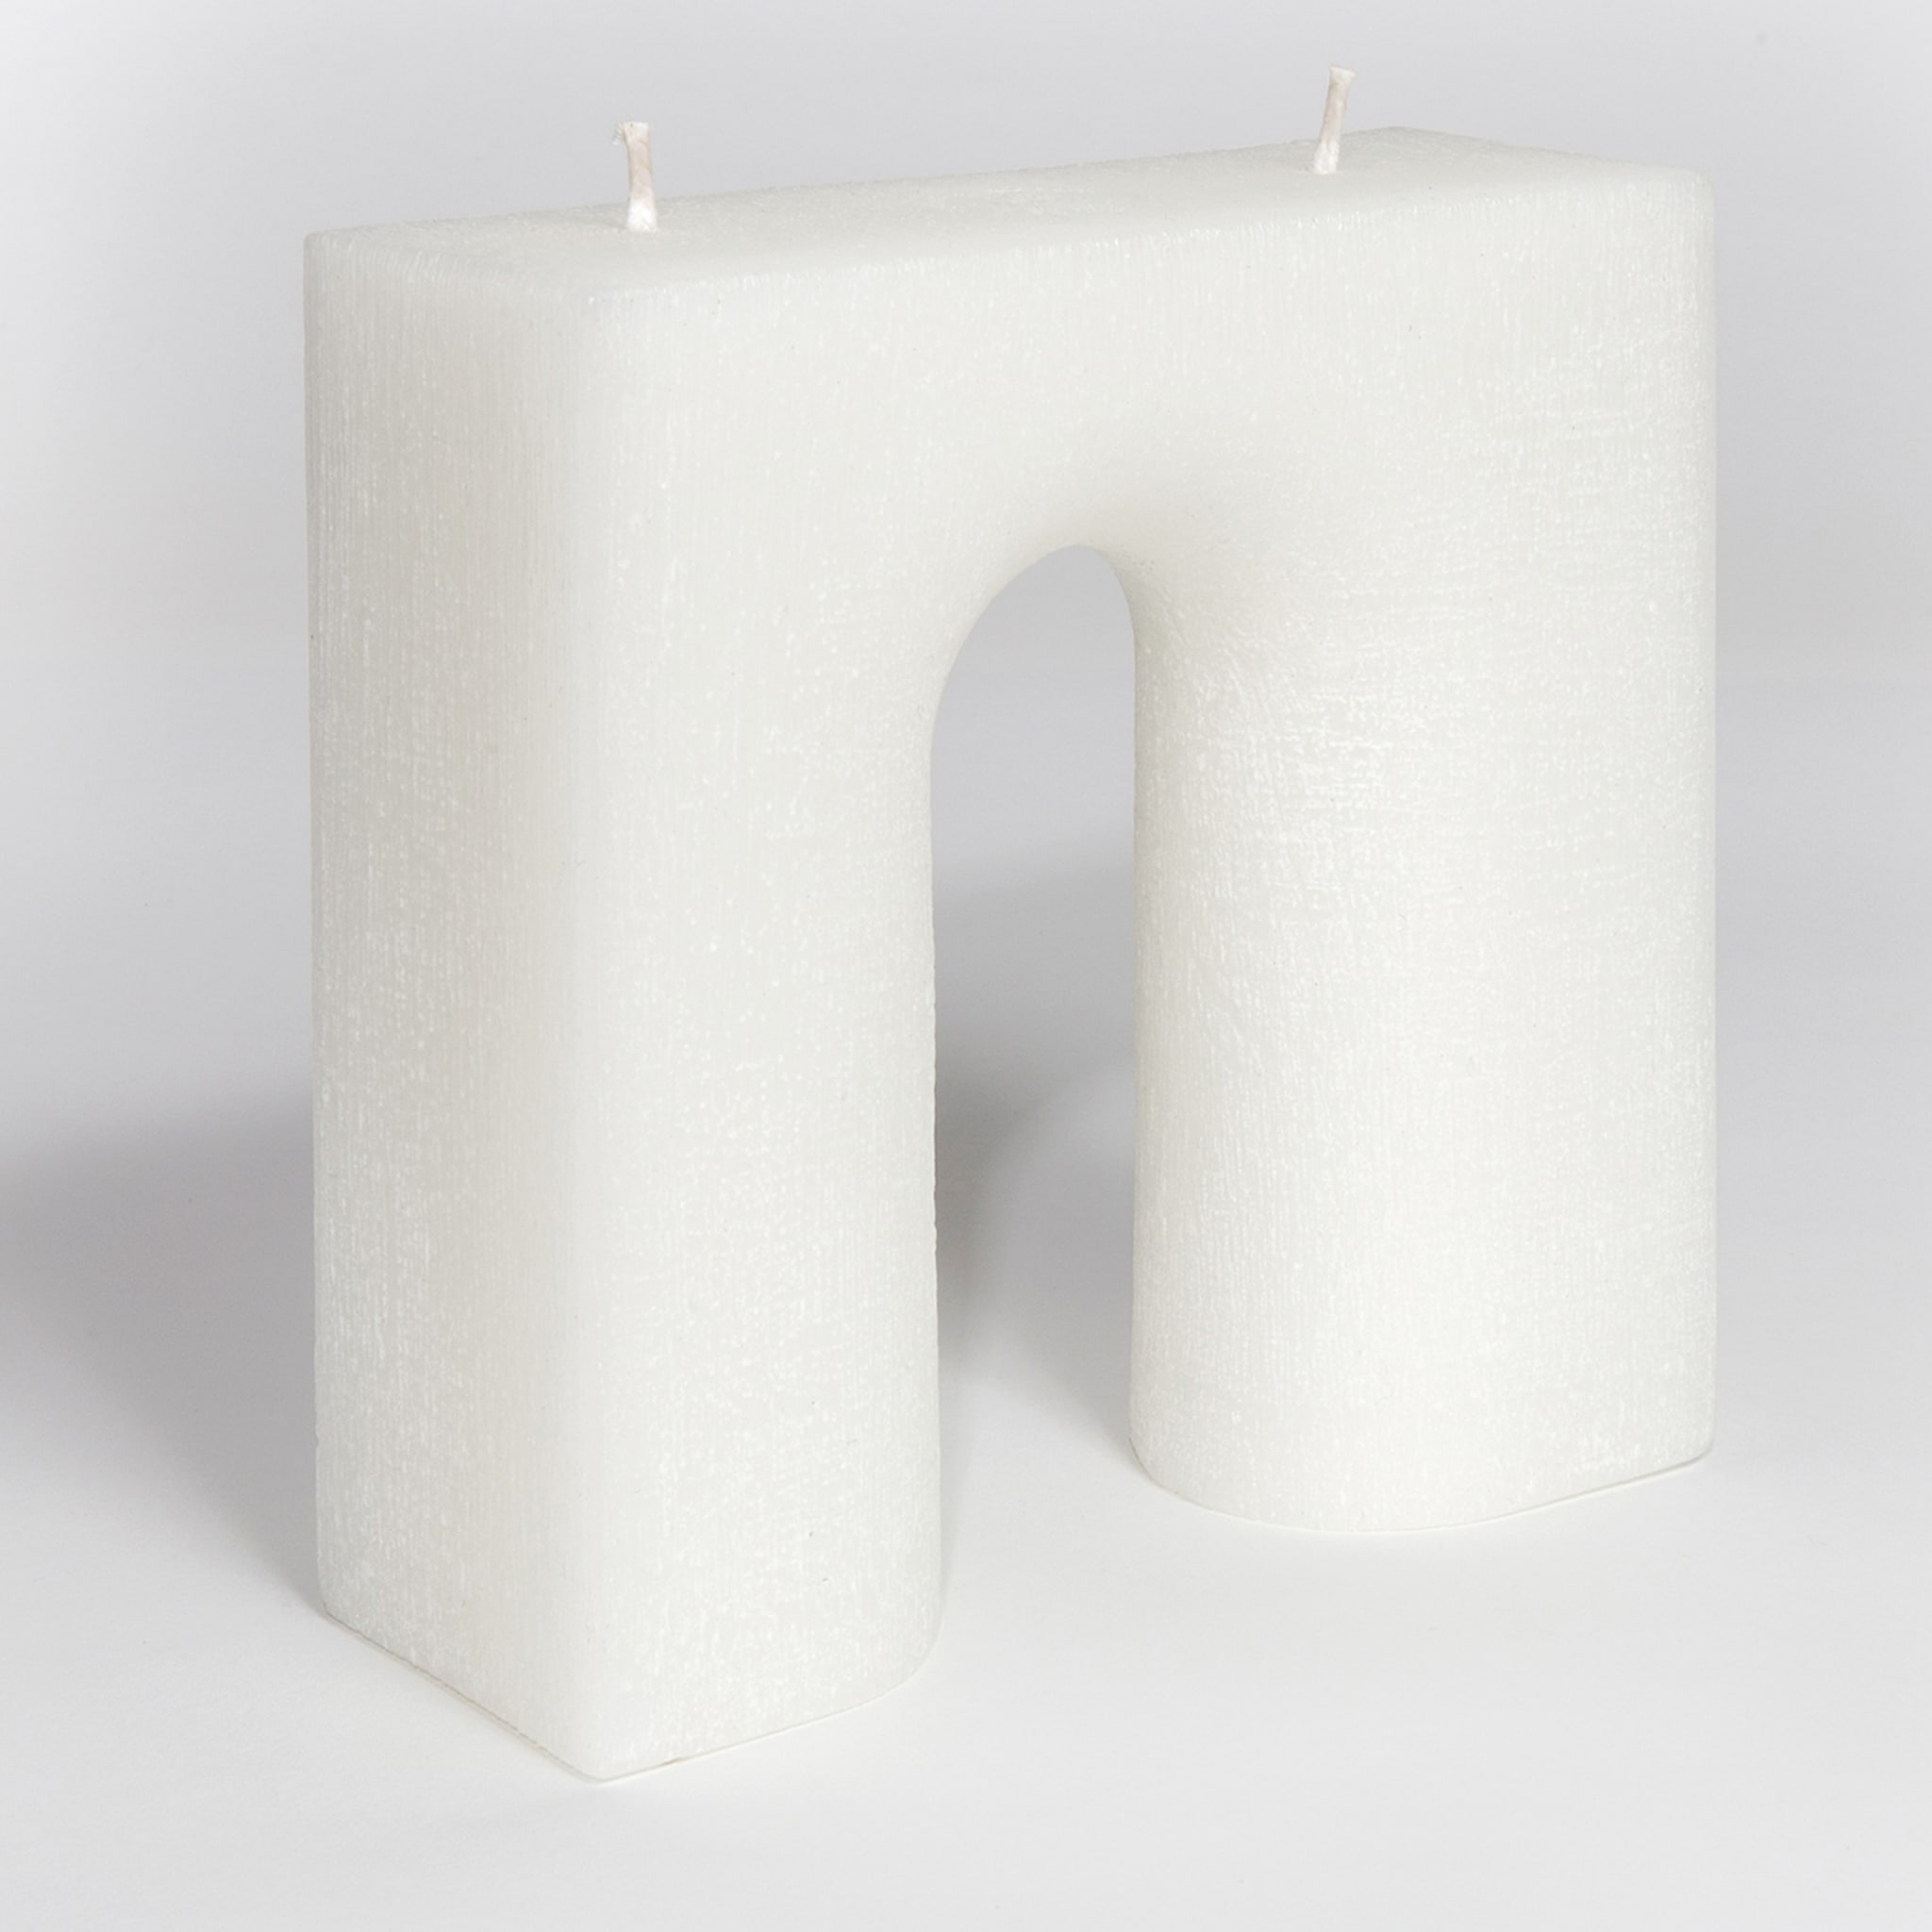 Trionfo Set of 2 Black and White Candles - Alternative view 5